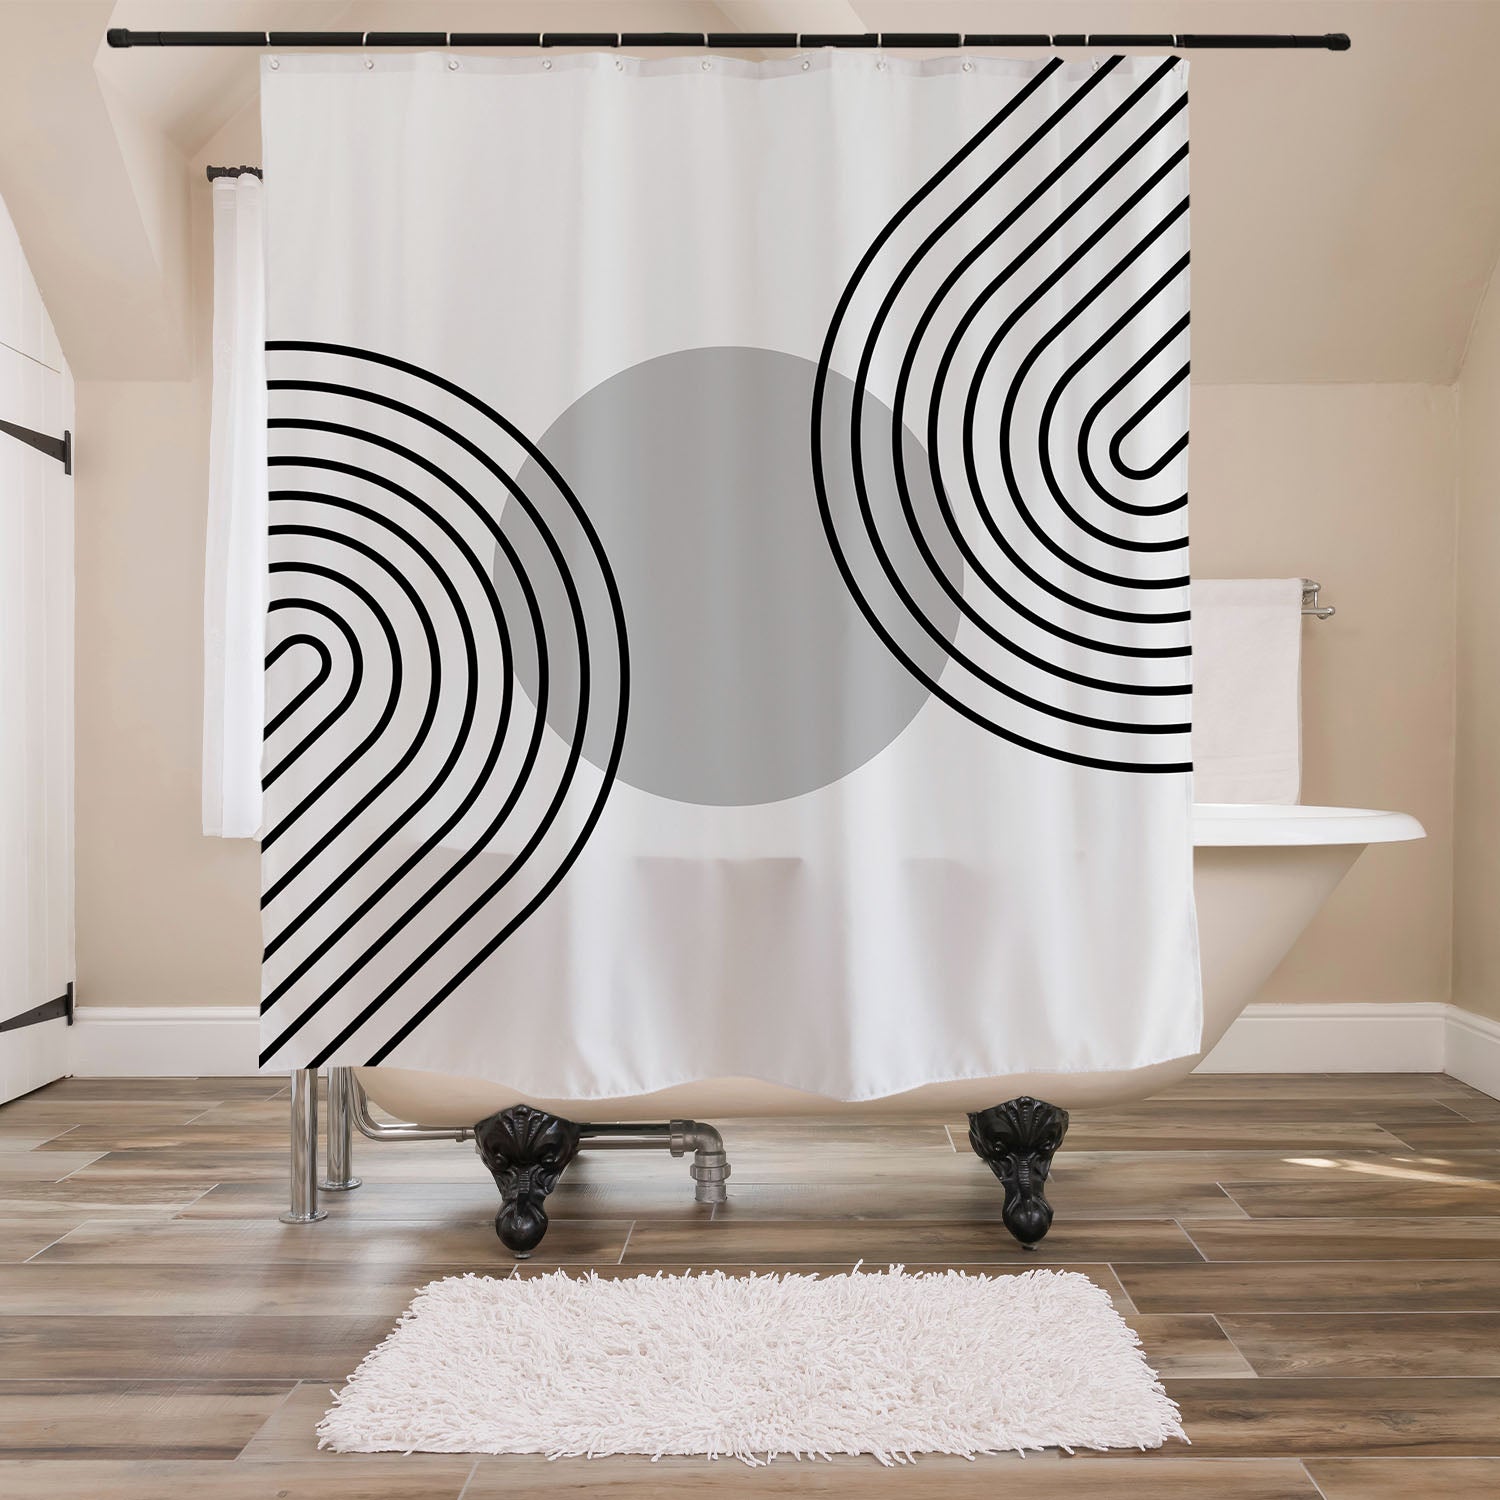 Feblilac Black and White Line Shower Curtain with Hooks